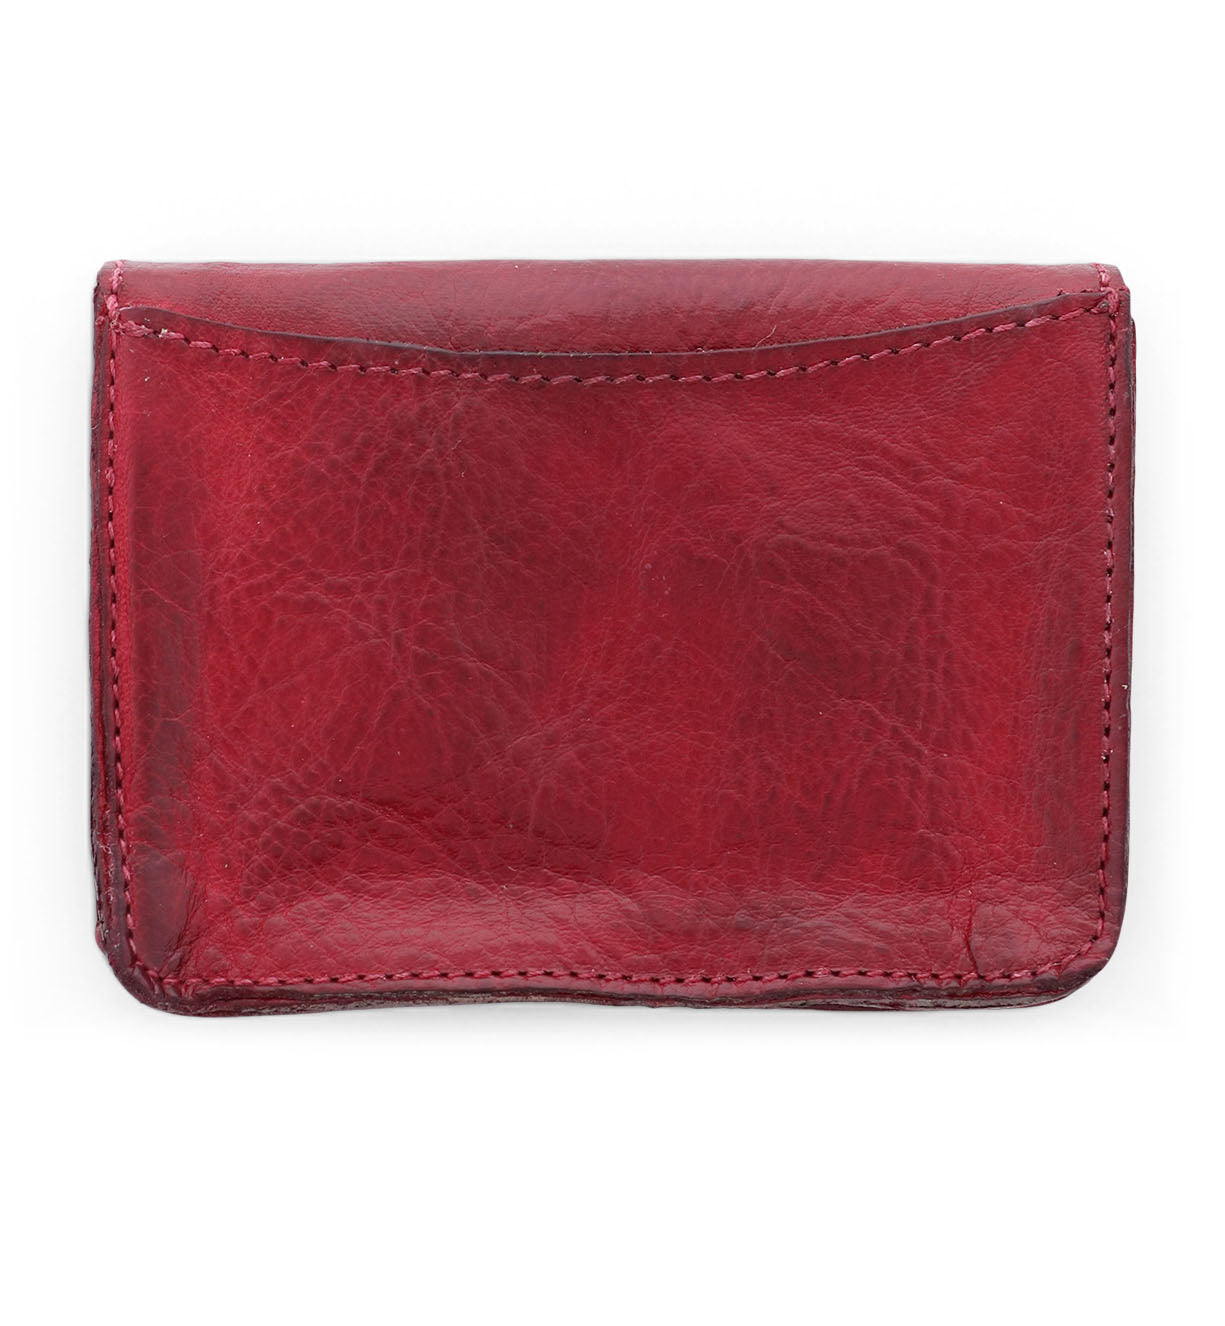 A Jeor by Bed Stu red leather card holder on a white background.